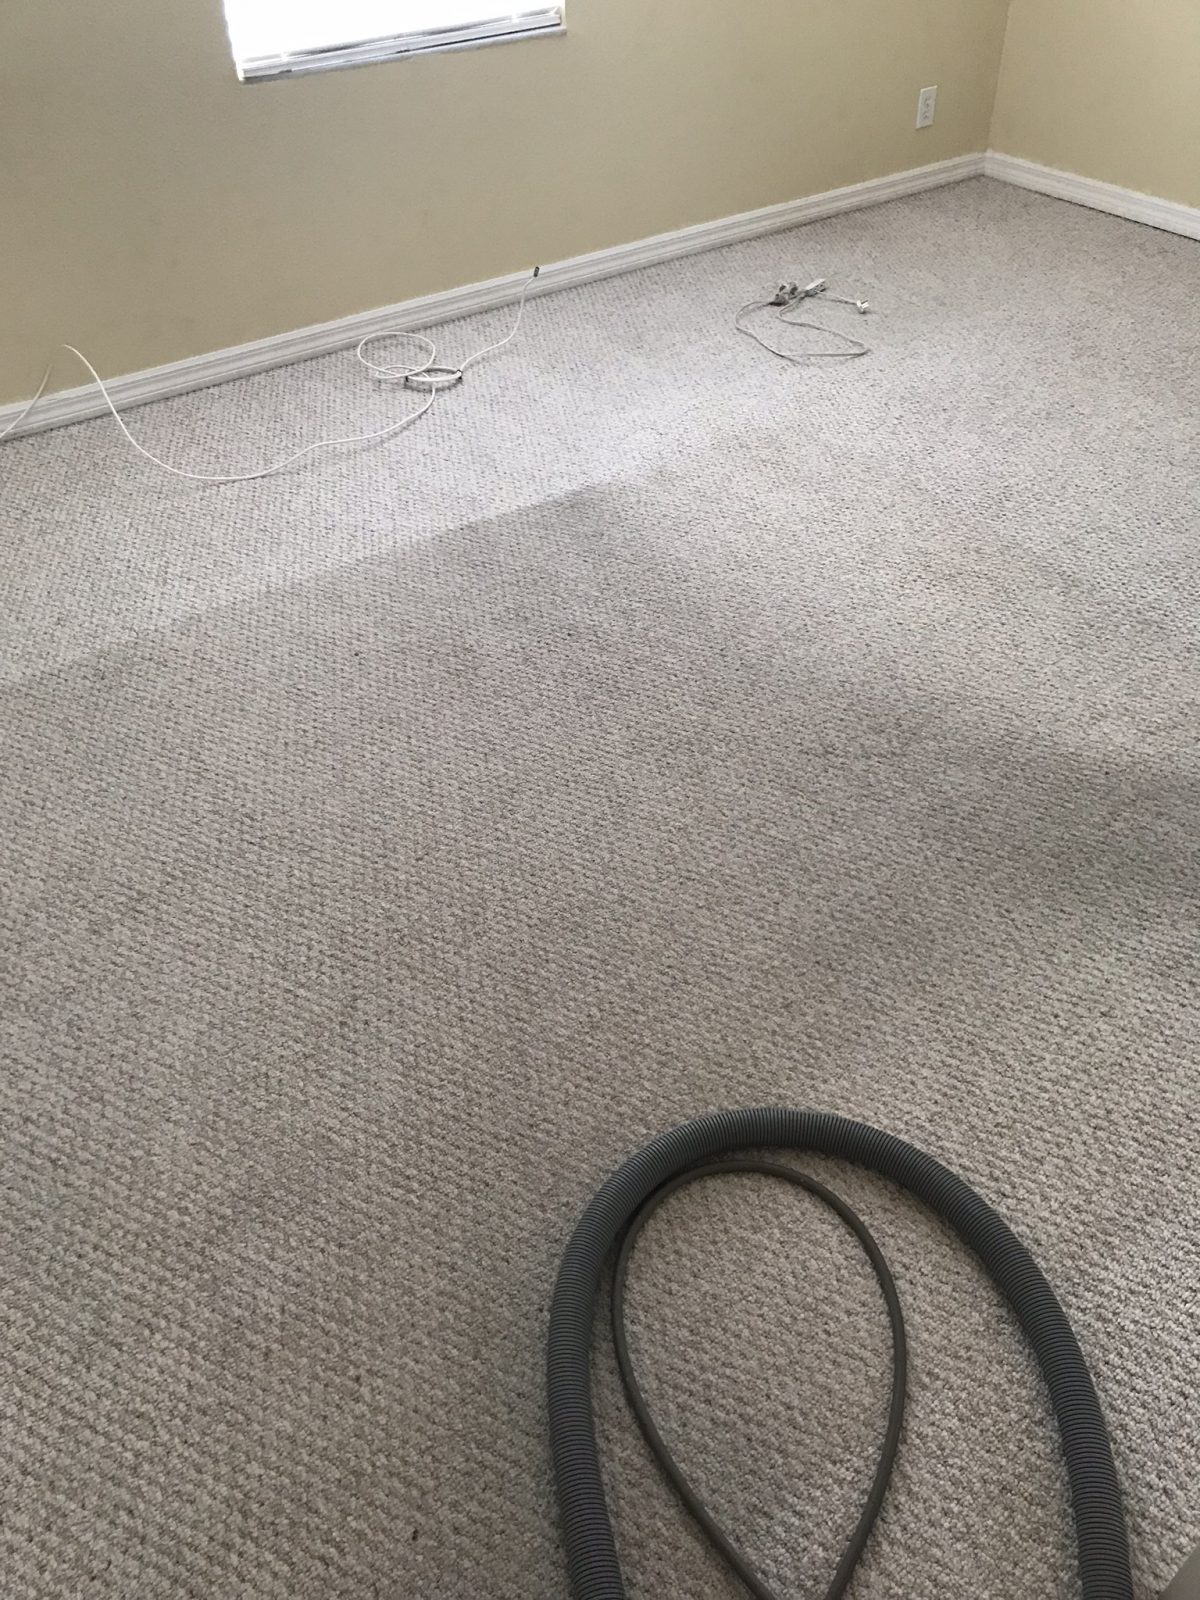 Professional Carpet Cleaning Holiday Florida by Howards Cleaning Service